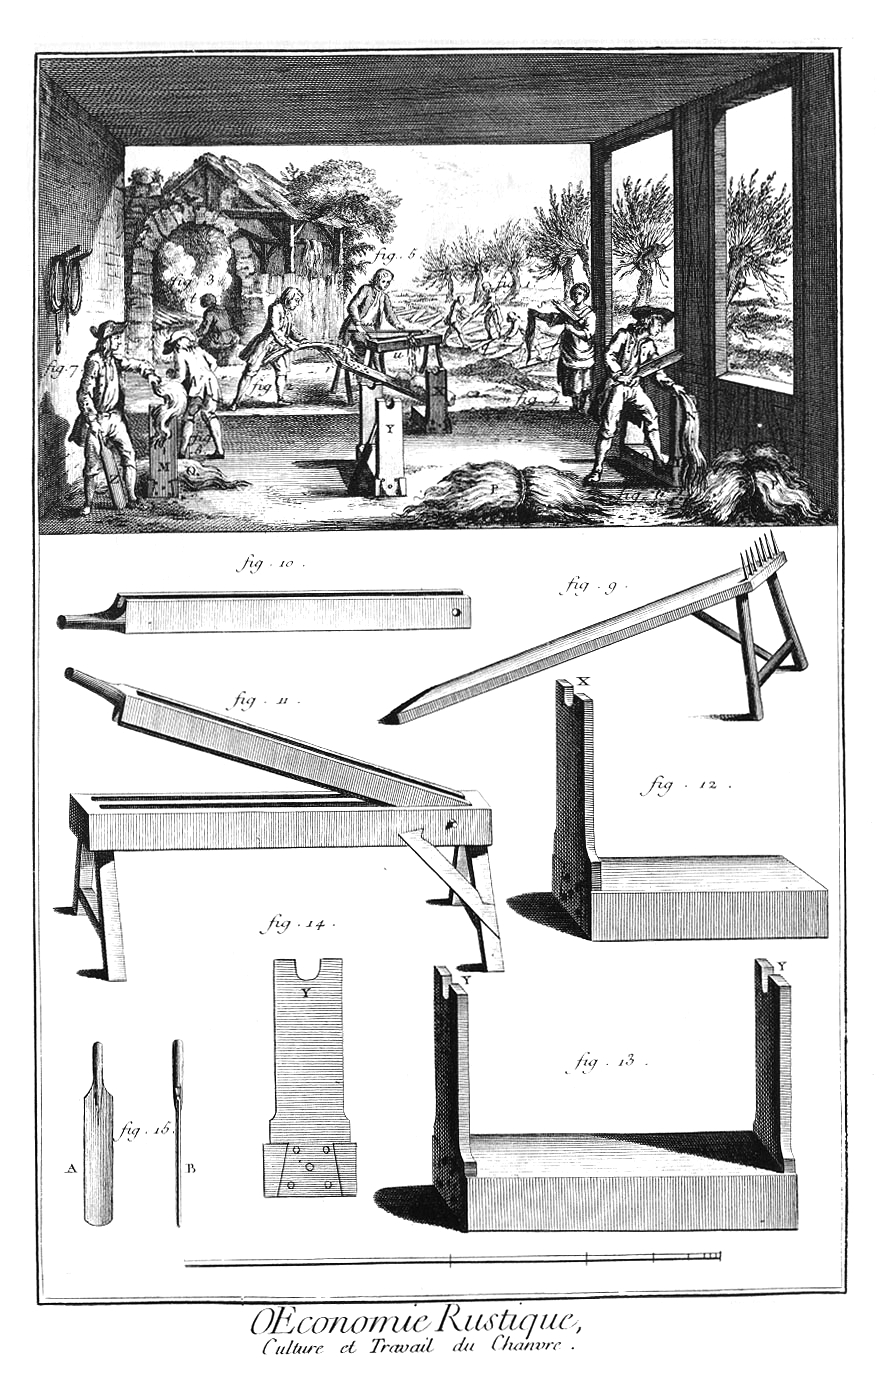 Diderot and d'Alembert illustration of scutching.